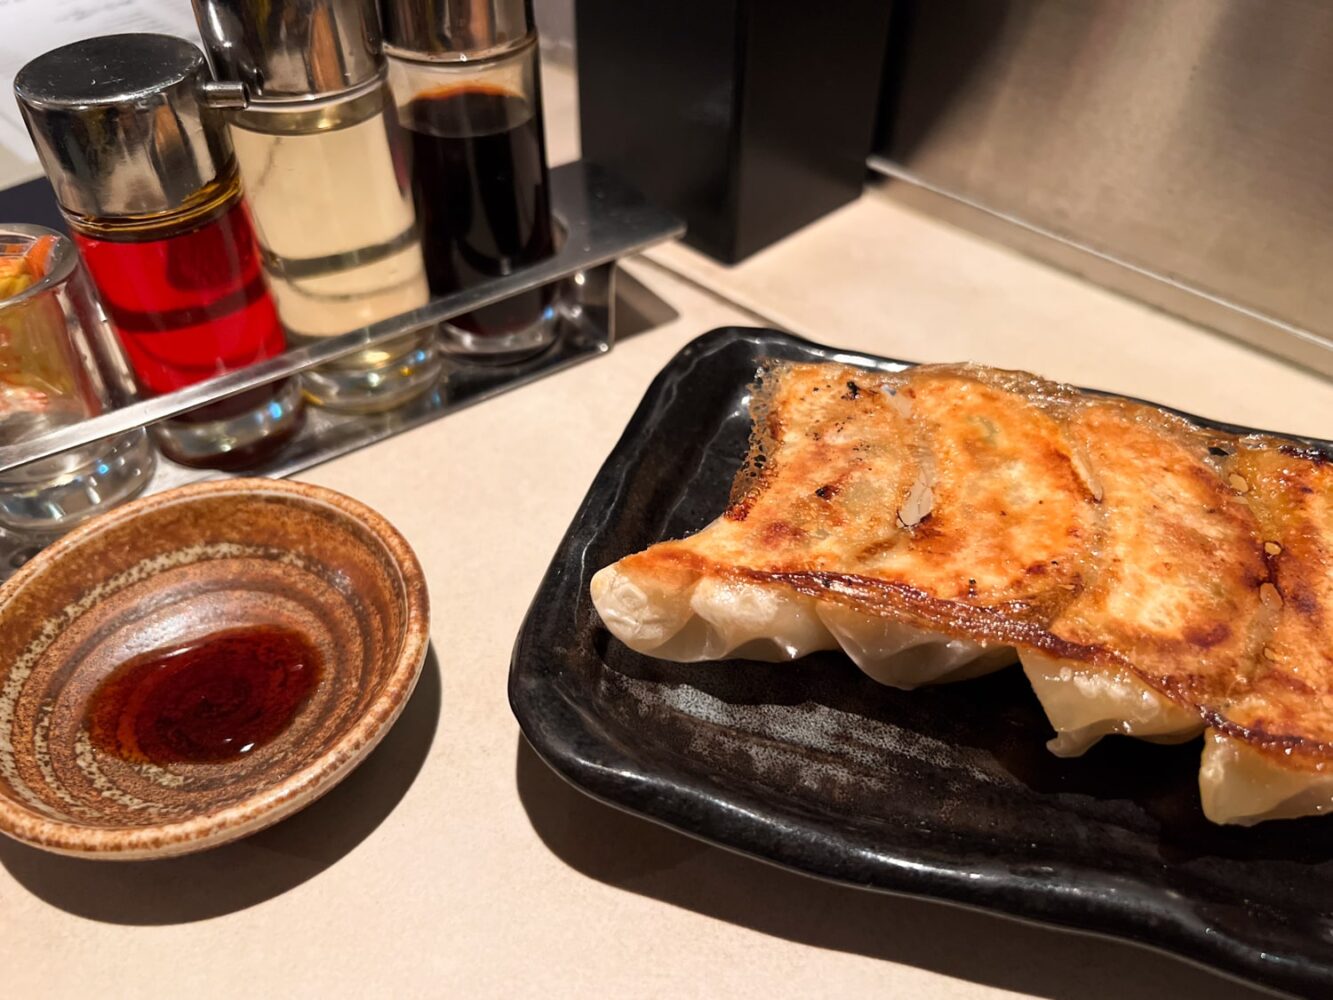 Plate of Japanese gyoza (potstickers) with dipping sauce at an izakaya restaurant.